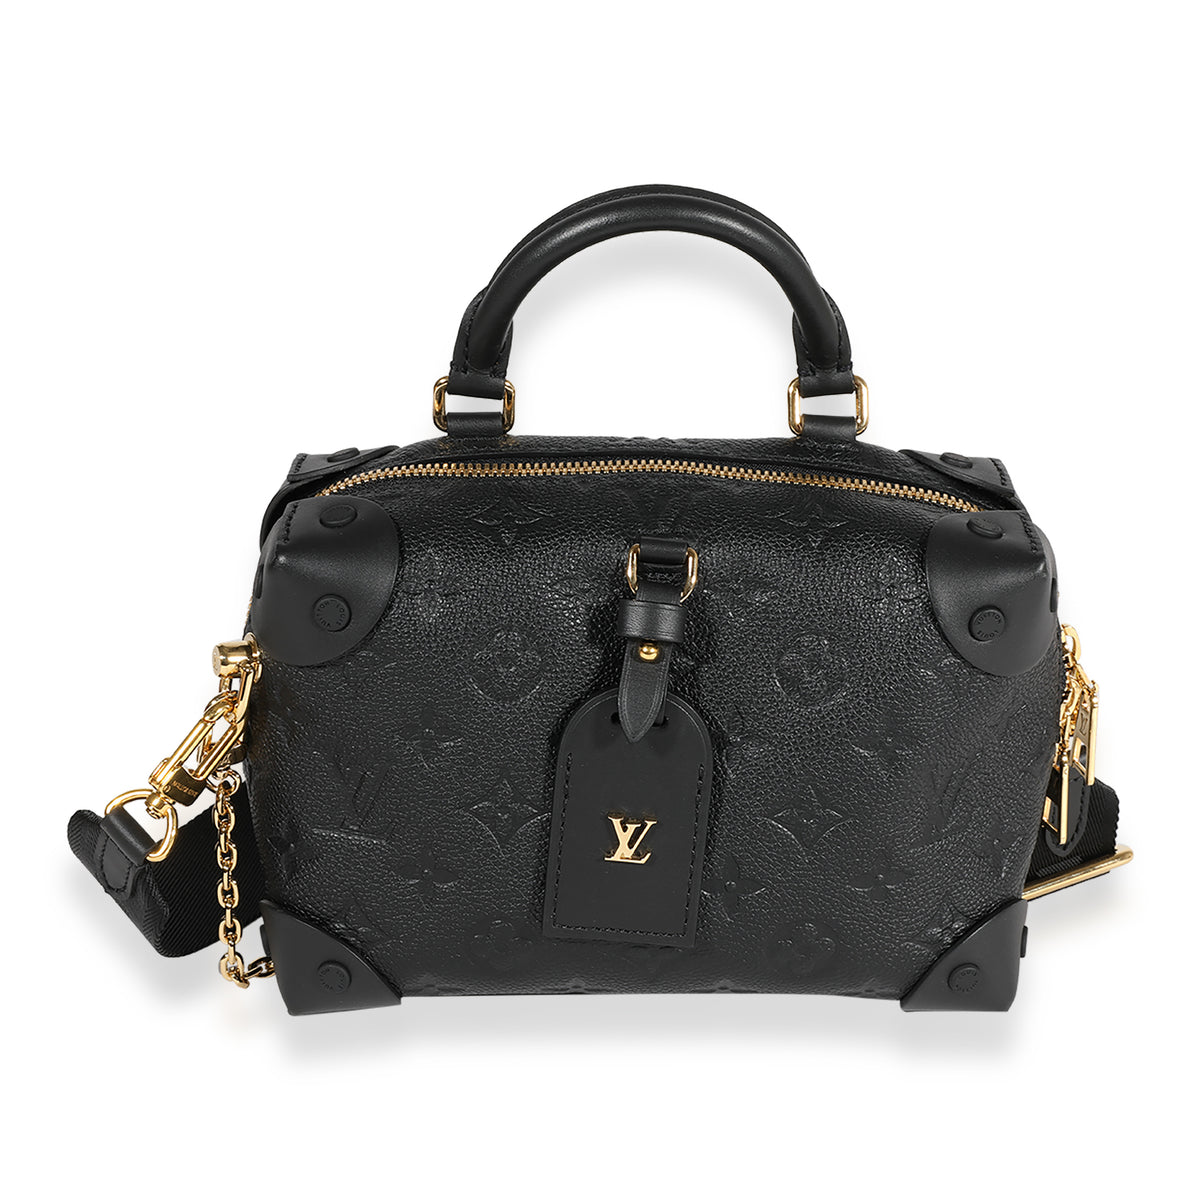 The new LOUIS VUITTON petite MALLE SOUPLE bag in black and pink 